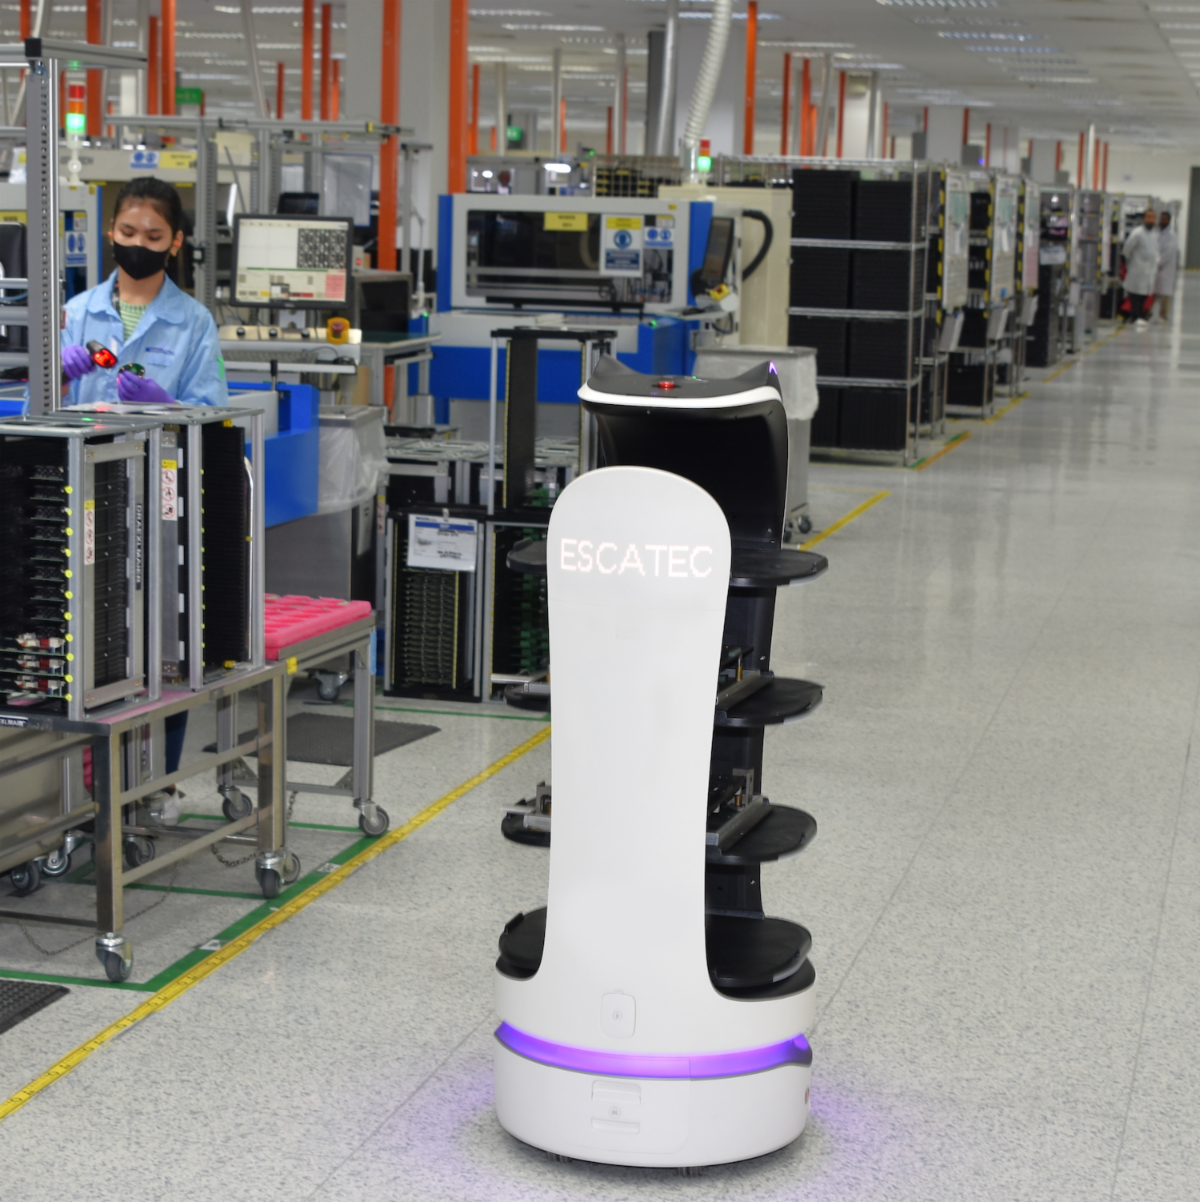 ESCATEC Deploys Smart Material Handling Robots In Latest Automation Project